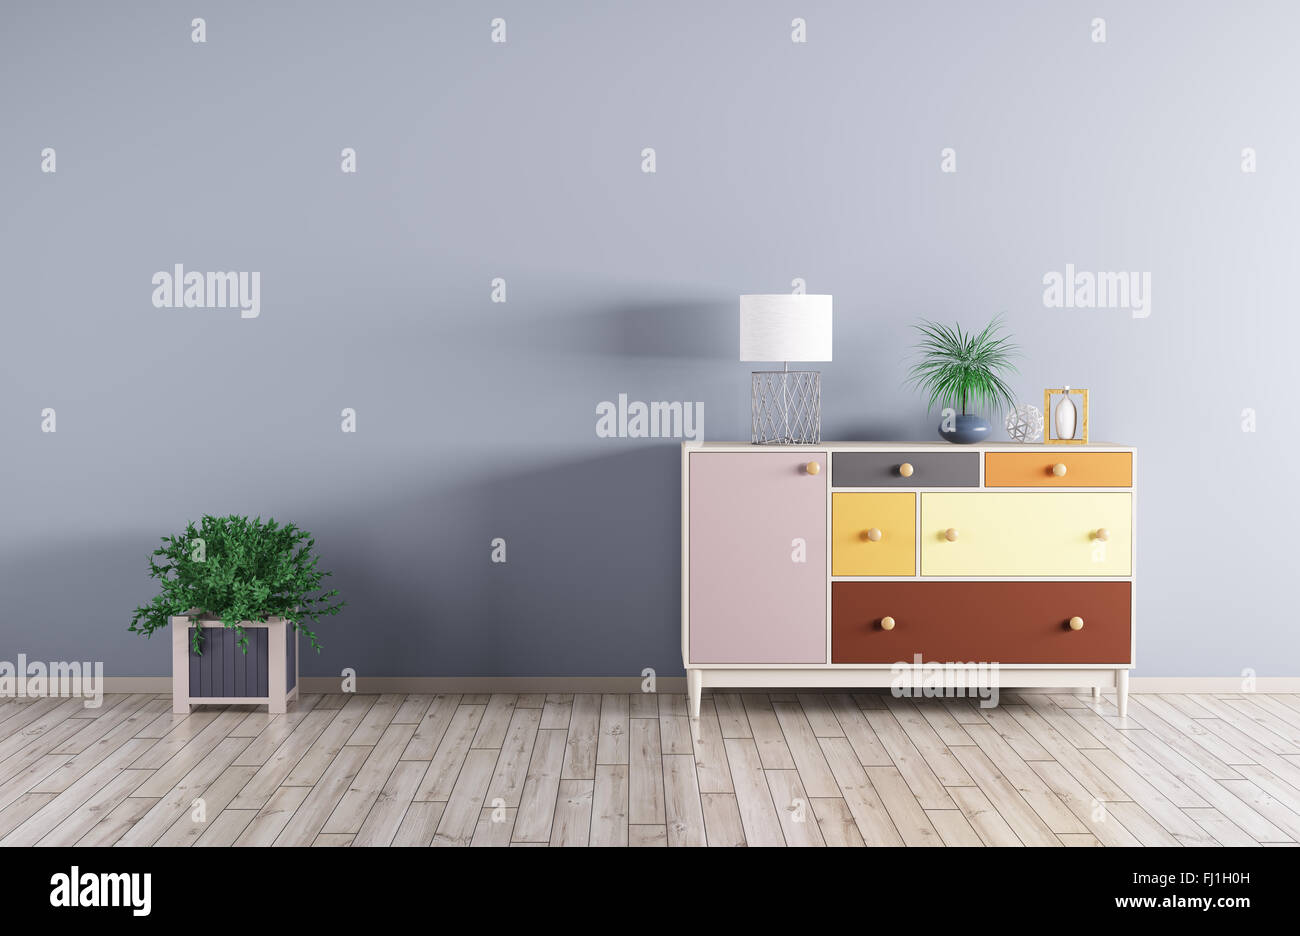 Interior of a room with cabinet and plant over blue wall 3d render Stock Photo